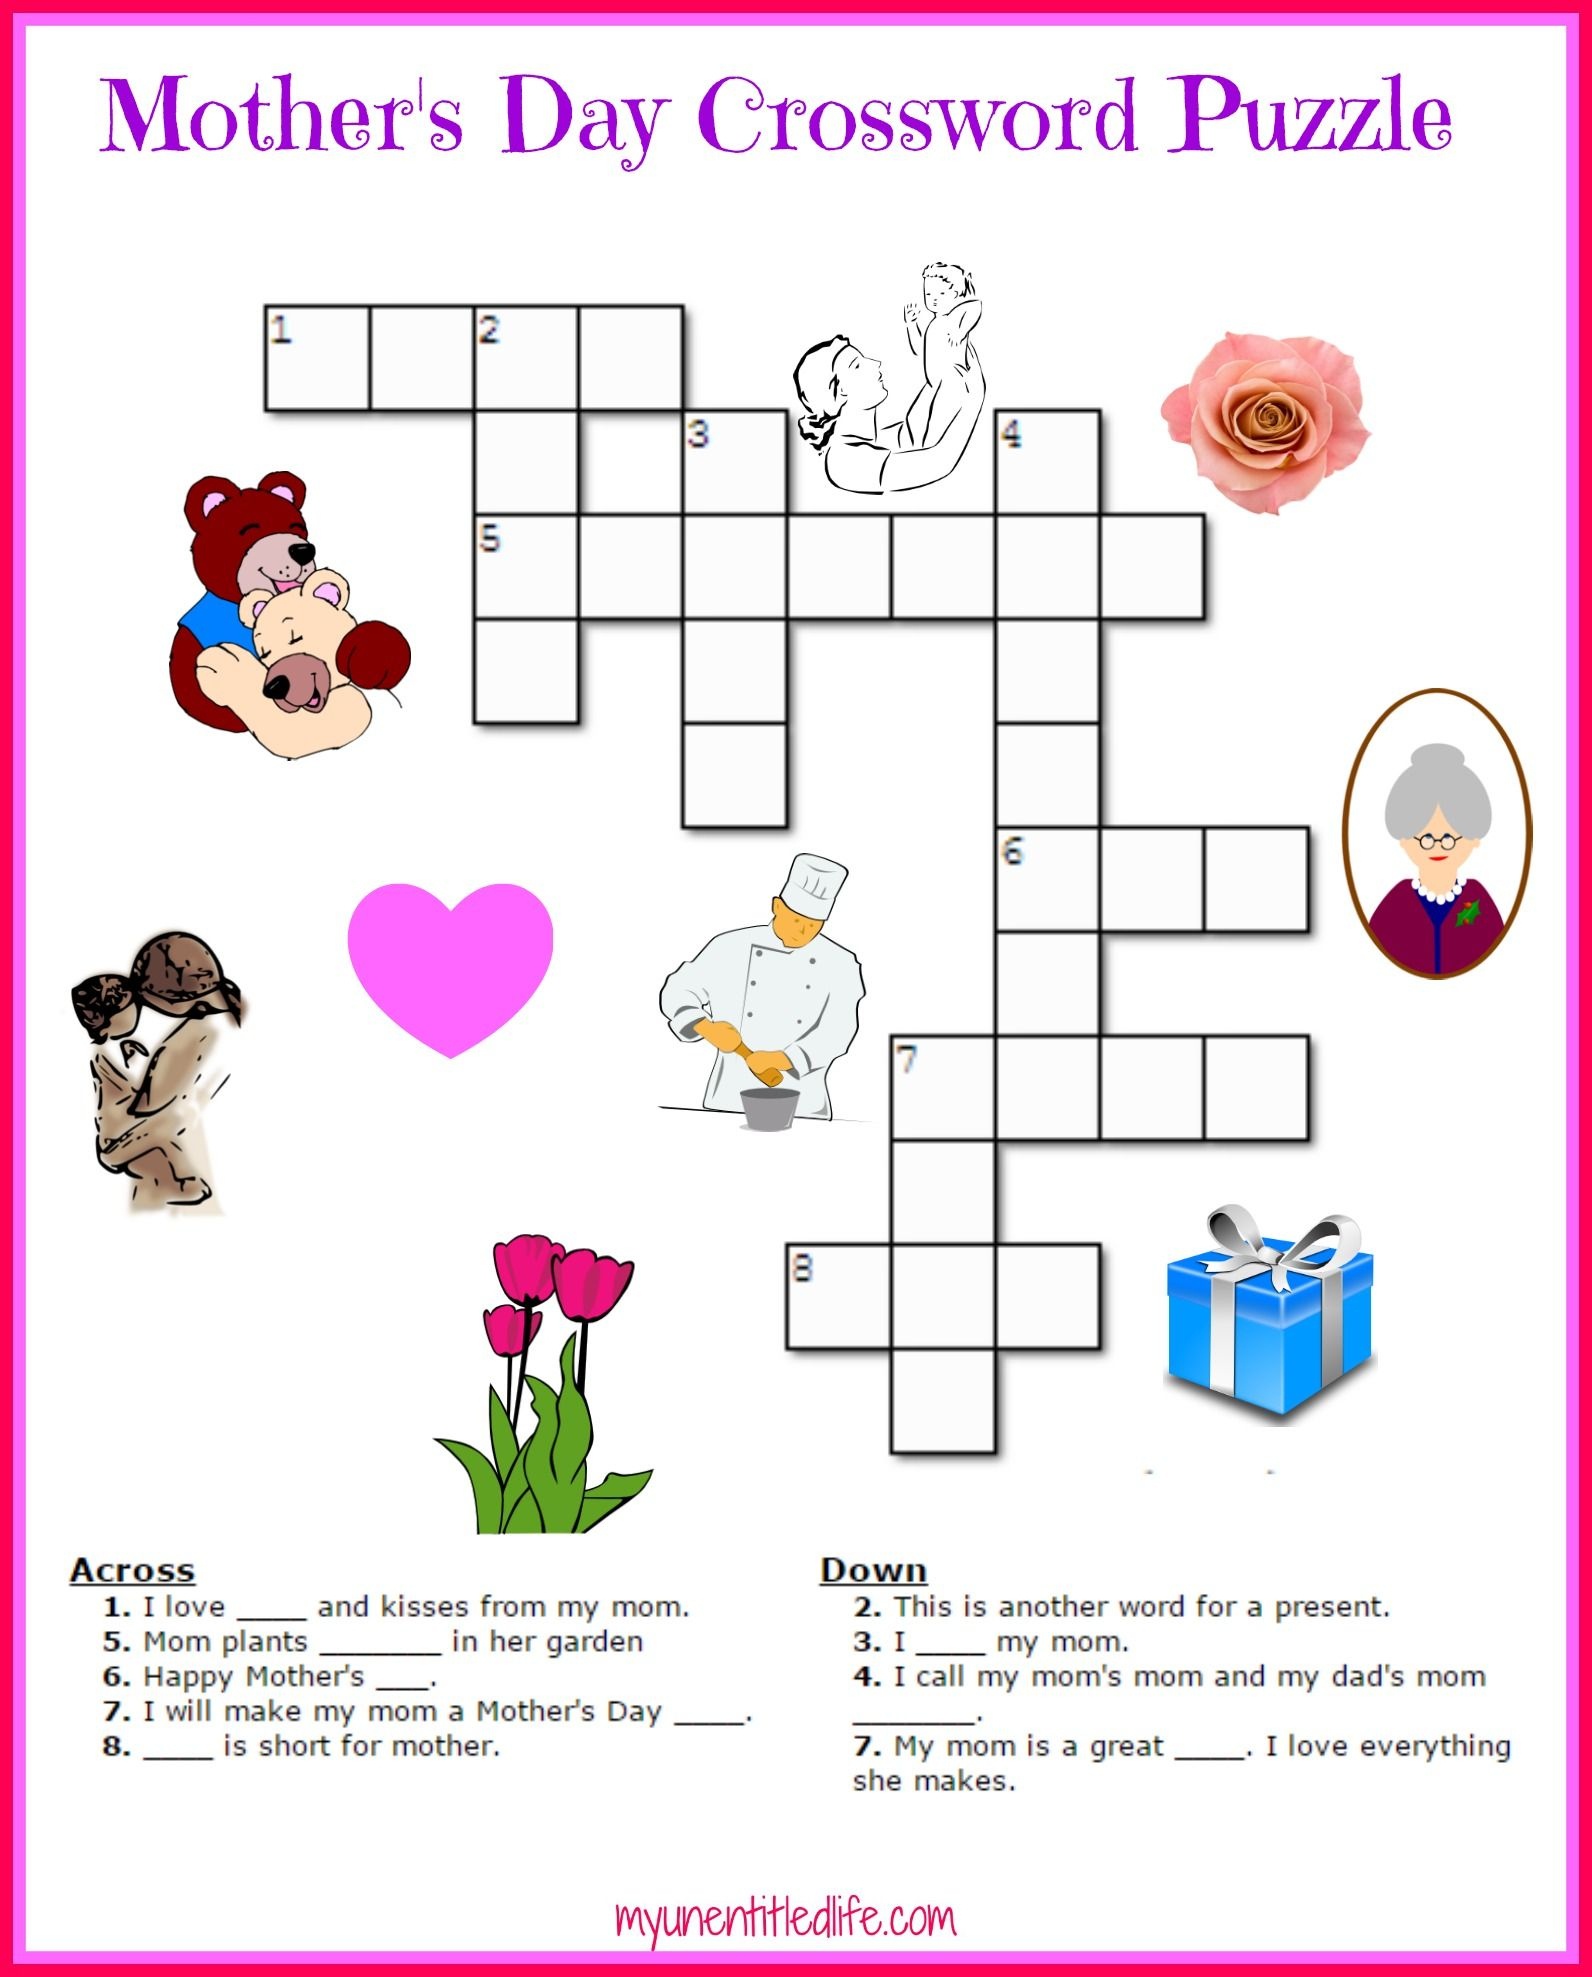 Free Mother&amp;#039;s Day Crossword Puzzle Printable | Crafts For Kids - Free Printable Mother&amp;#039;s Day Games